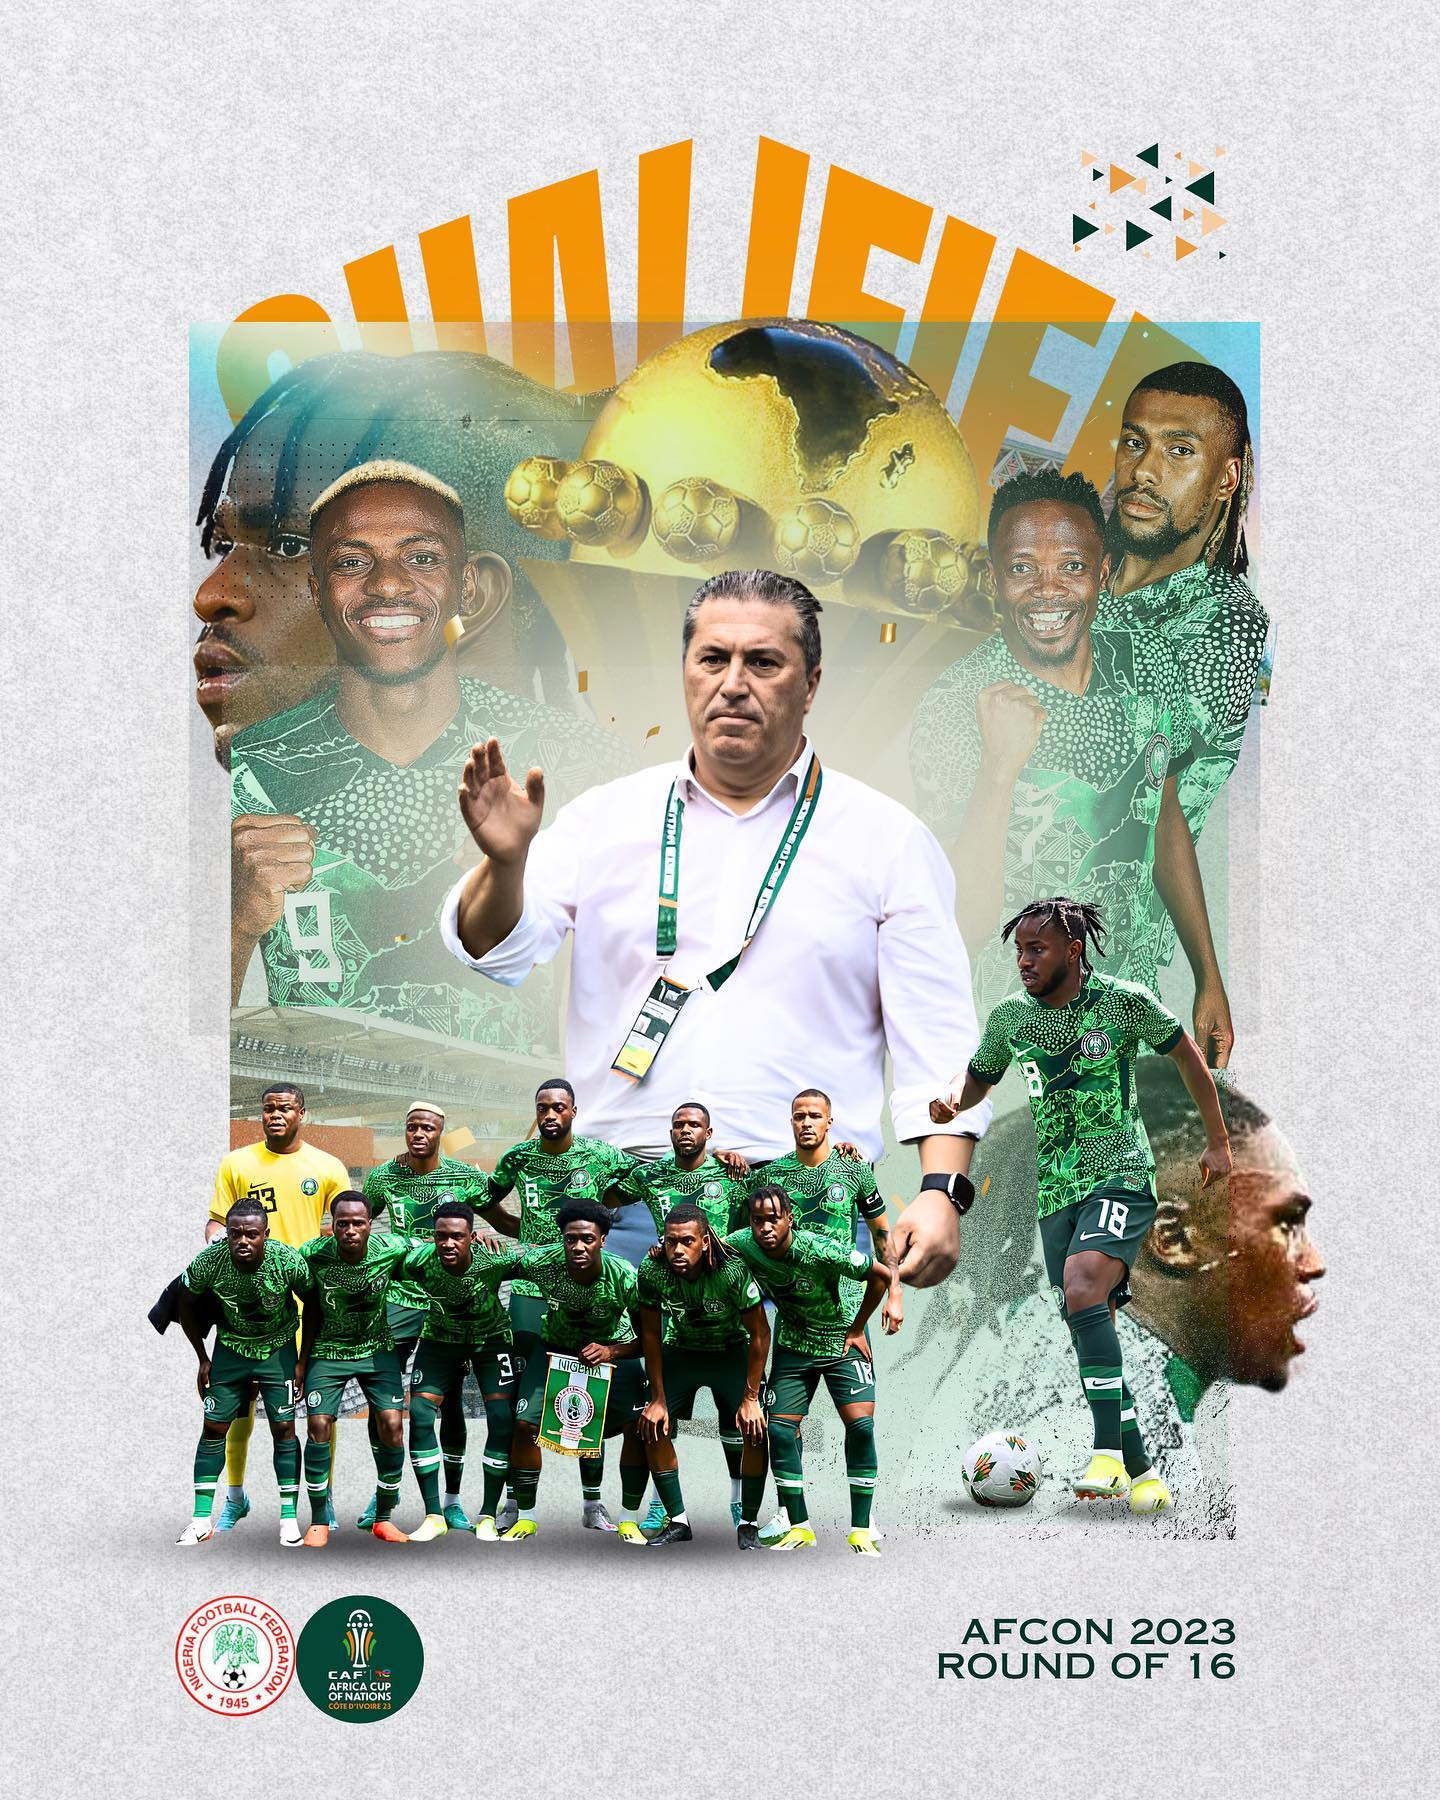 AFCON2023: Can The Super Eagles Win The Cup?